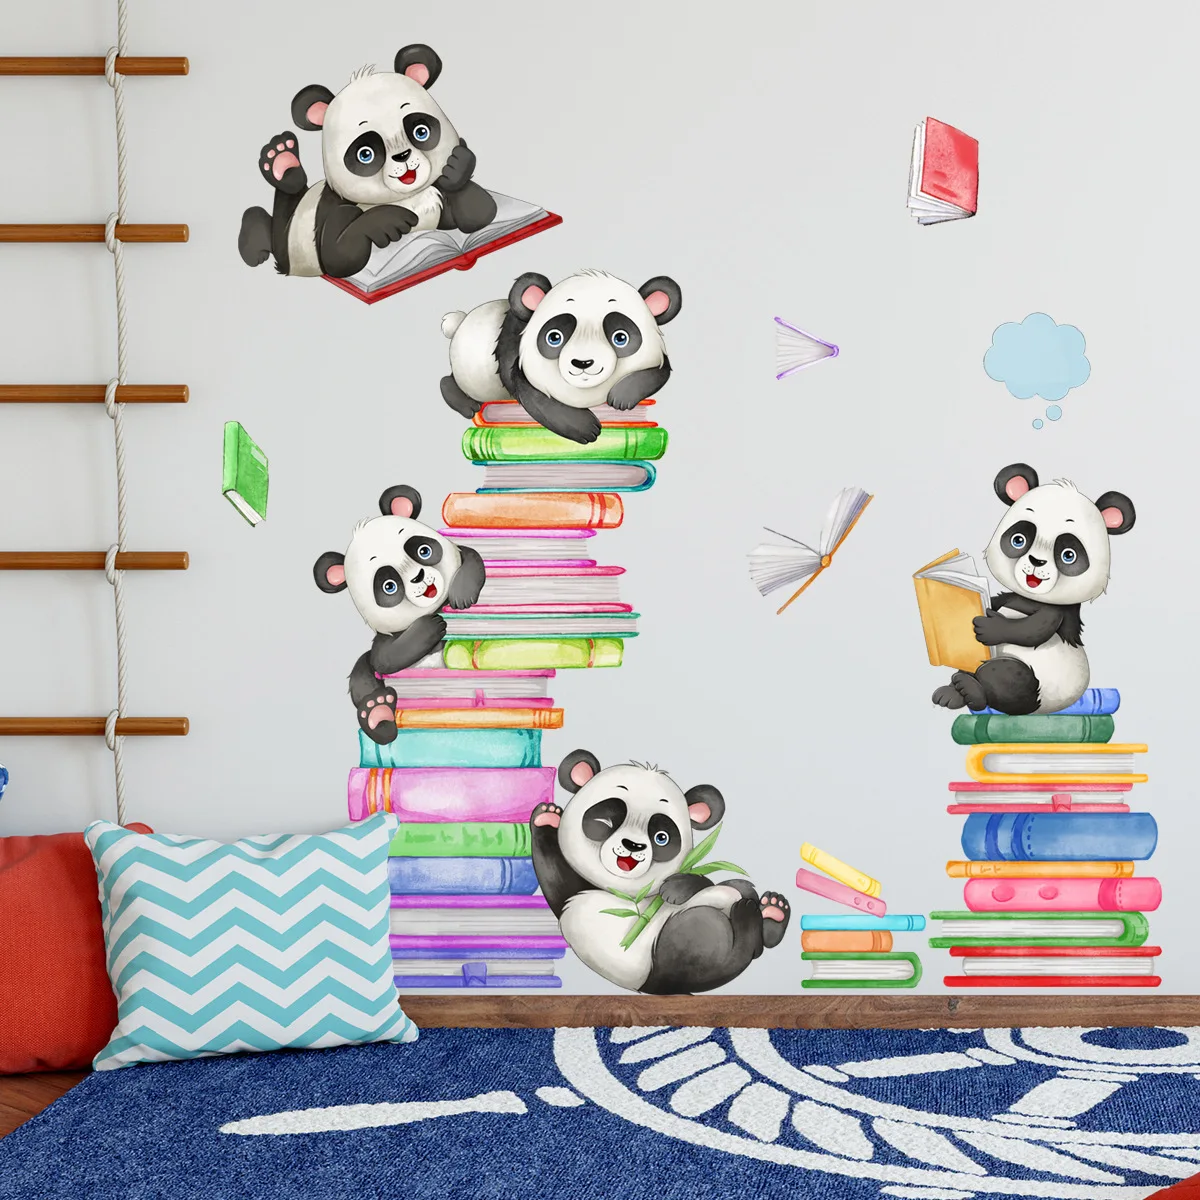 2pcs Animal Panda Book Cartoon Wall Stickers Dormitory Background Wall Home Decoration Wall Stickers Mural Wallpaper Ms6263 30 90cm green plant potted butterfly wall stickers background wall living room home decoration wall stickers wallpaper ms2317